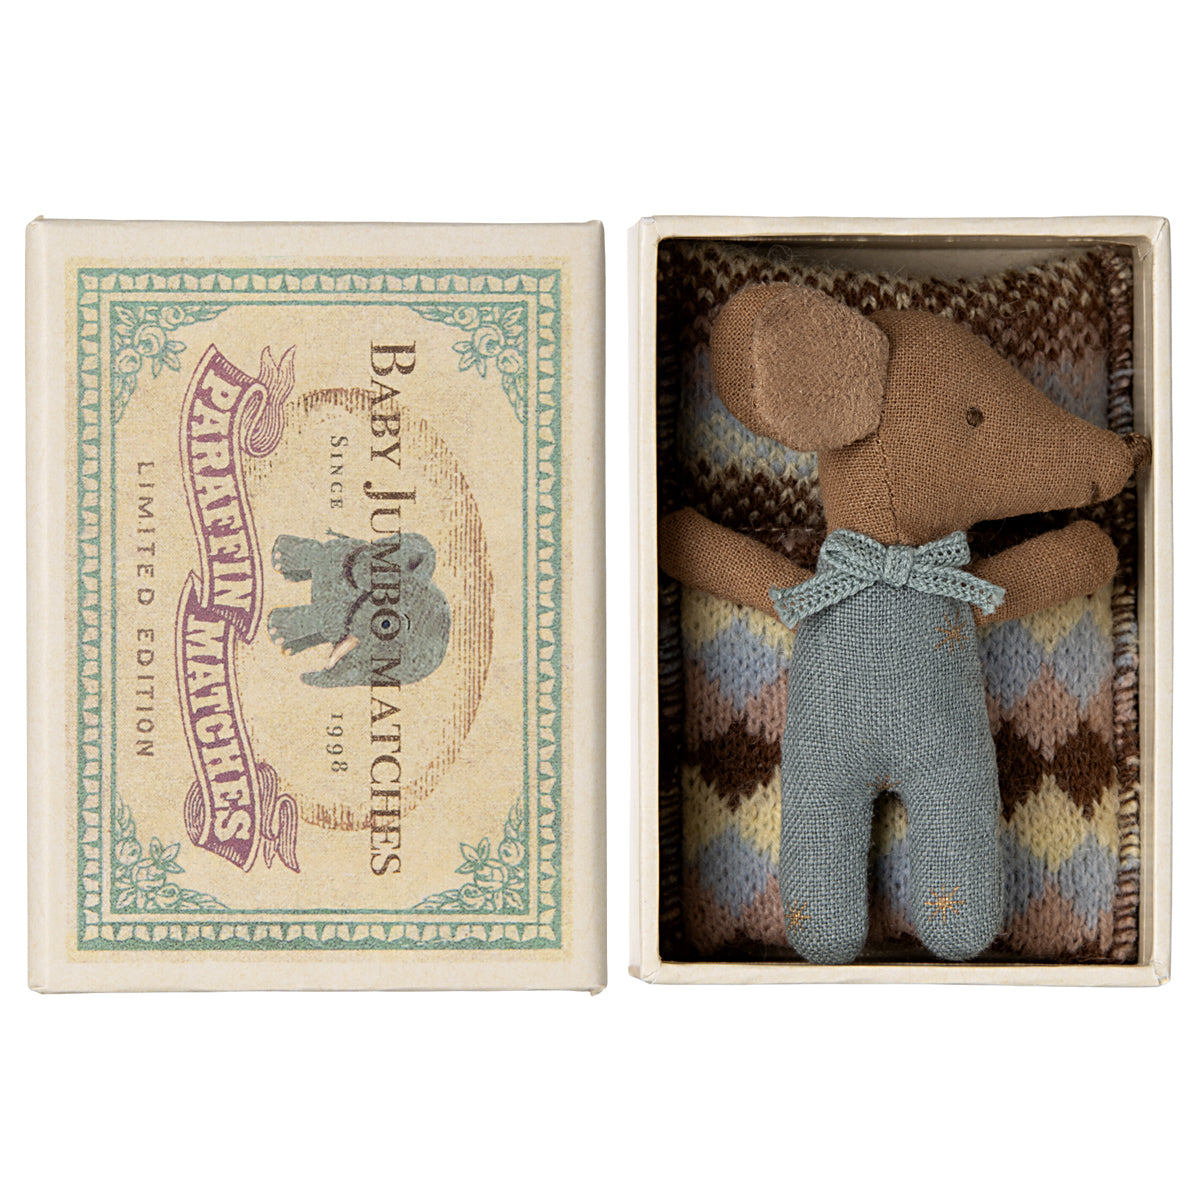 *Pre-Order* Maileg, Sleepy Wakey Baby Mouse in Matchbox - Blue (Due April)